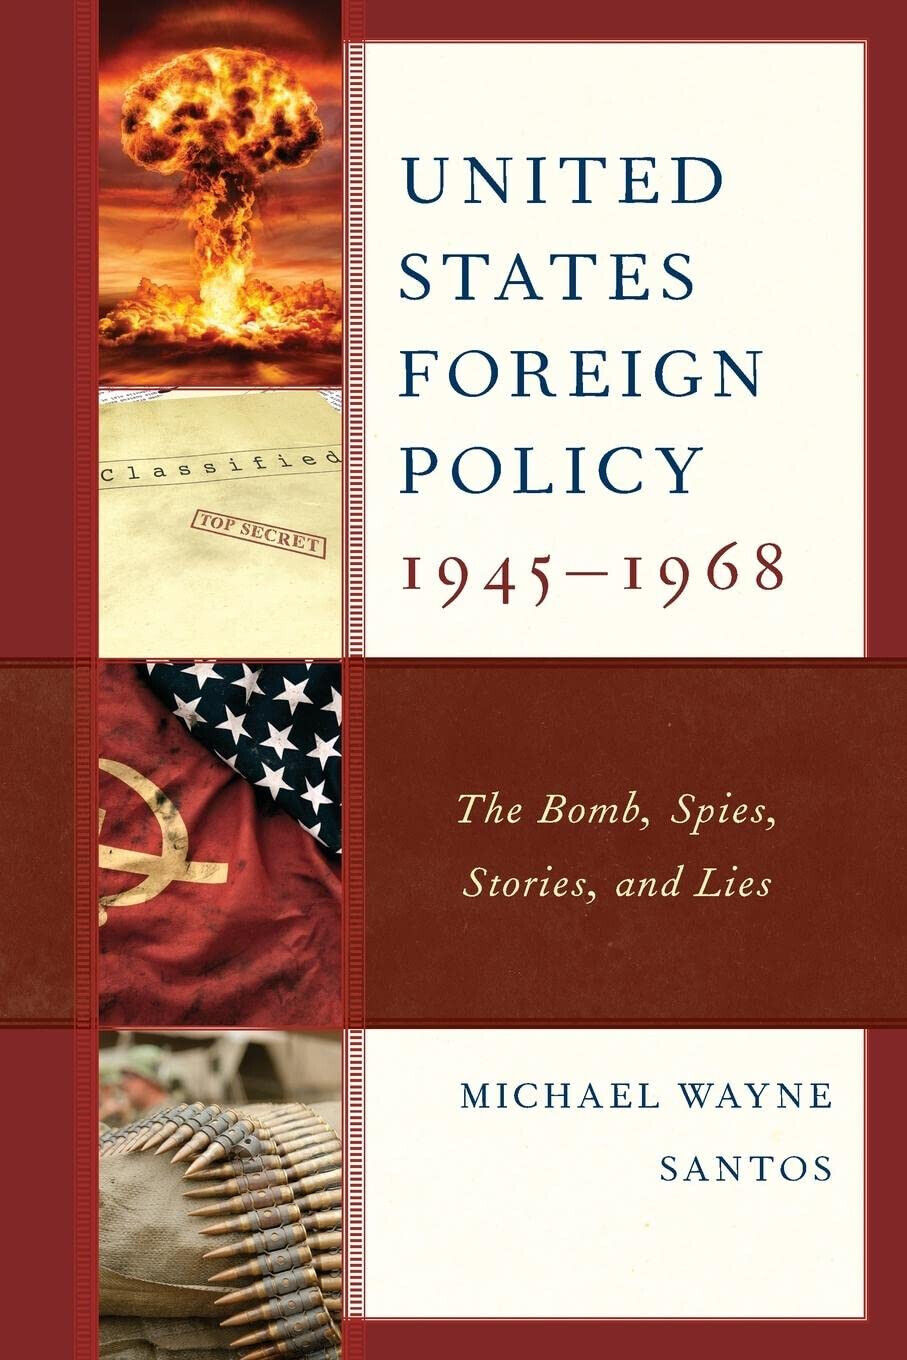 United States Foreign Policy 1945-1968 - Michael Wayne Santos - 2022